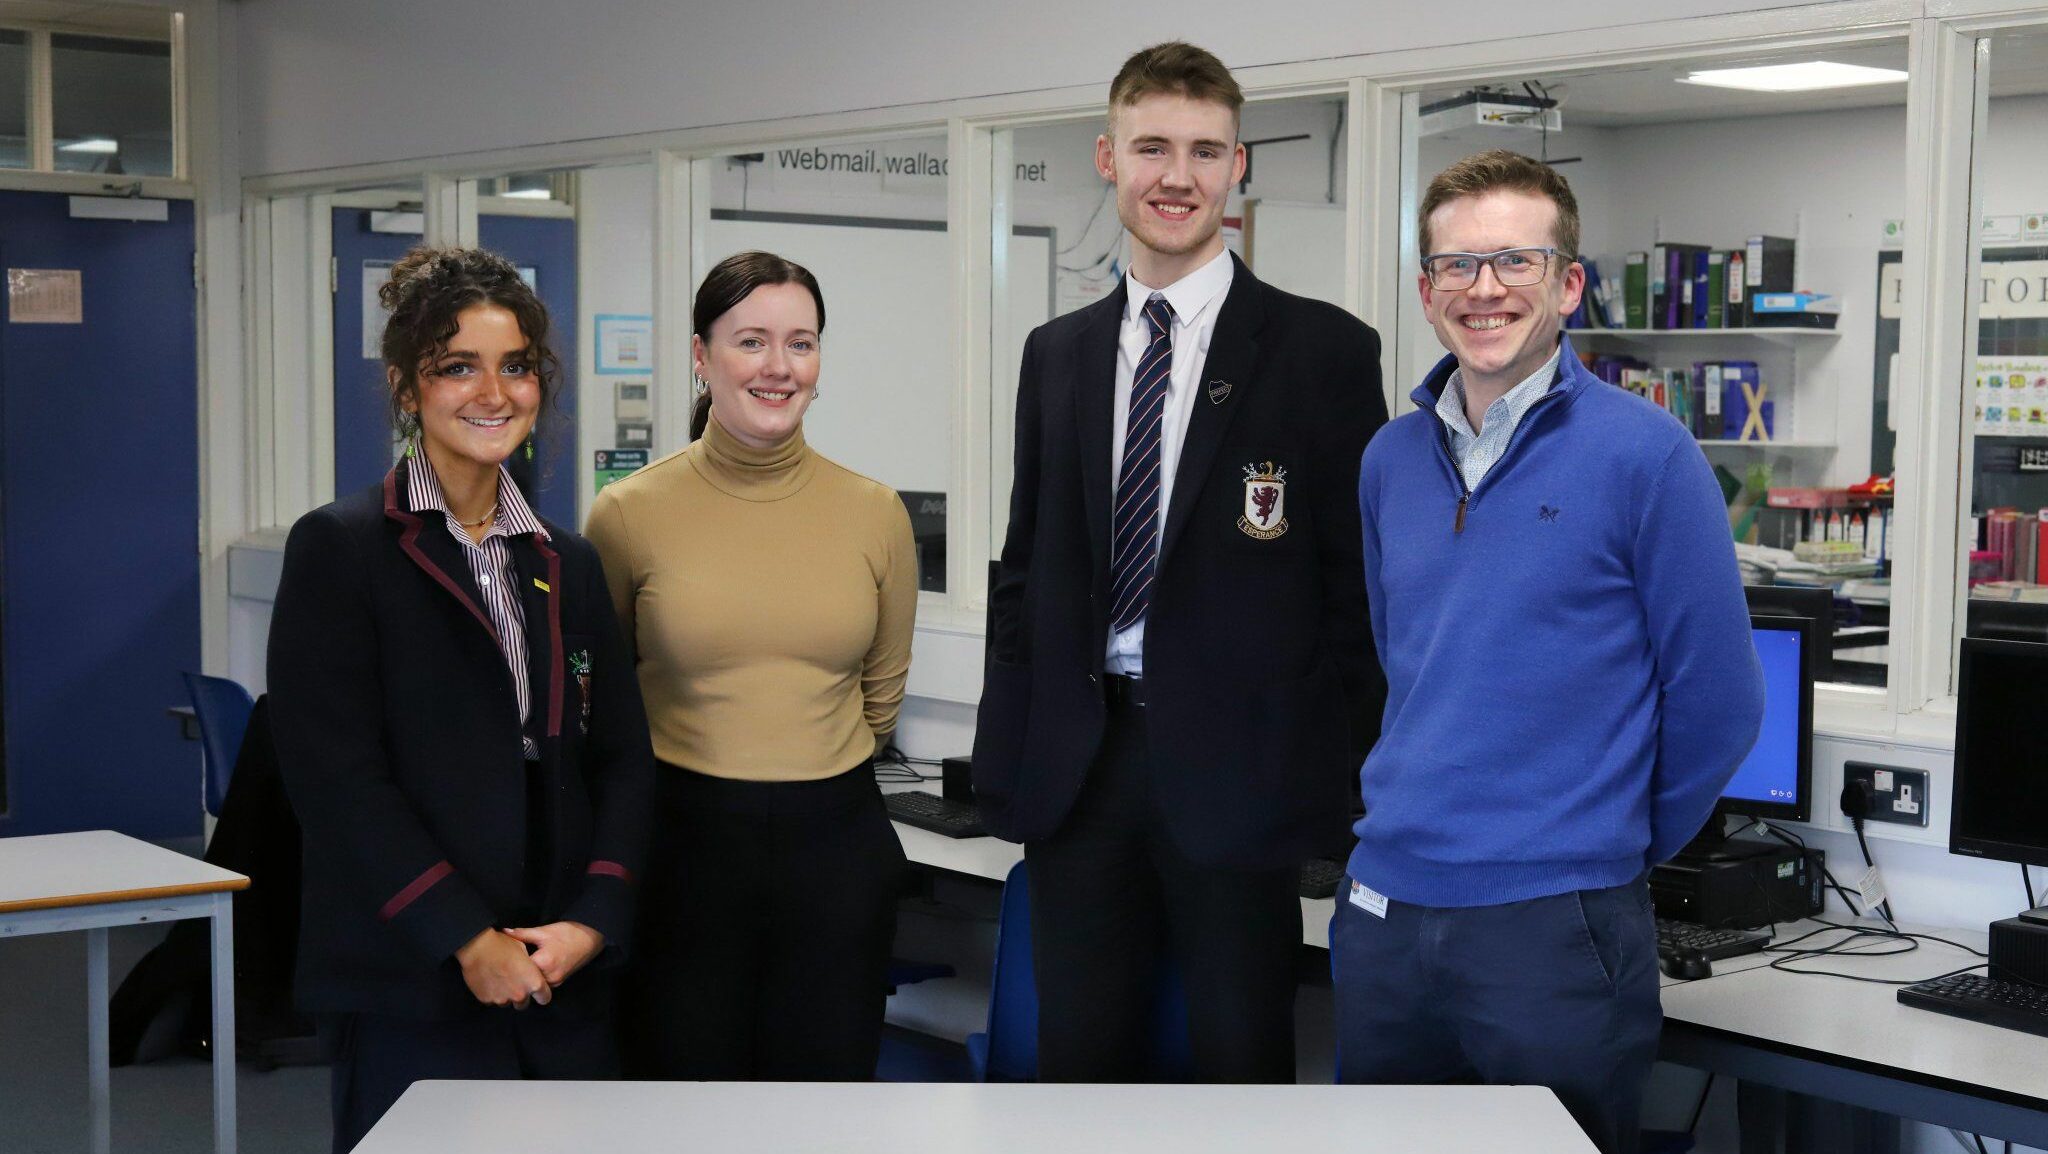 Pictures of two Datactics employees and two students from Wallace High School Lisburn after an AI Ethics talk